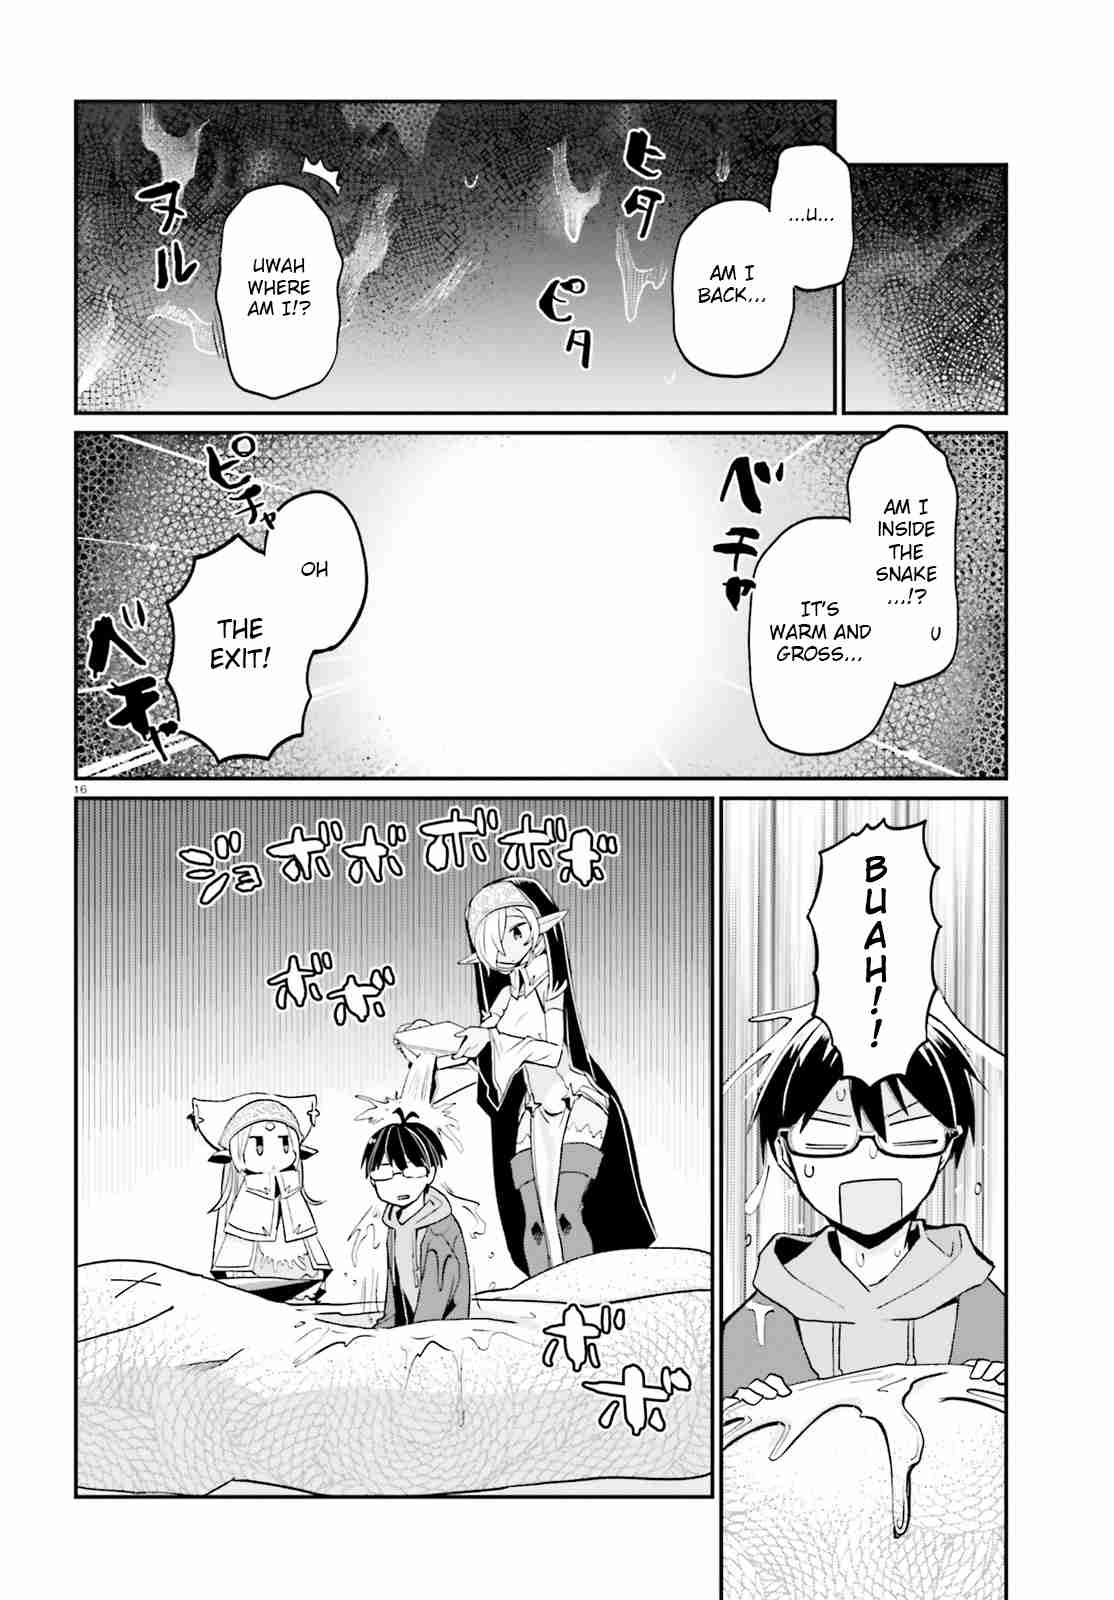 Welcome to religion in another world Vol. 1 Ch. 5 Welcome to mister Tody's homecoming